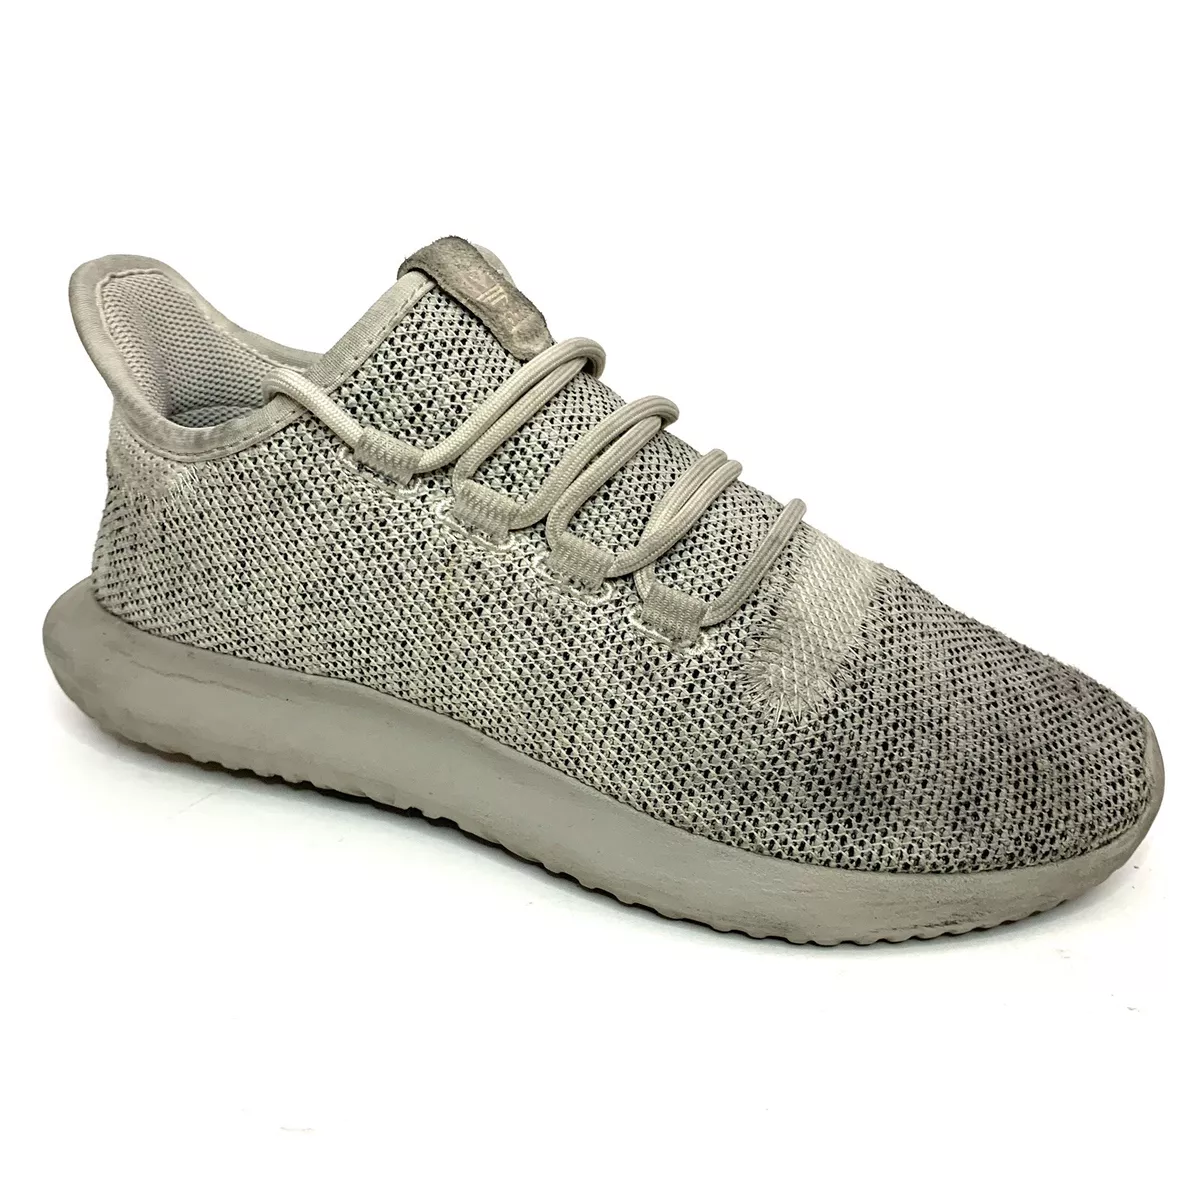 Adidas Boys Tubular Shadow BB8877 Running Shoes Lace Up Low Top Size 7 | eBay